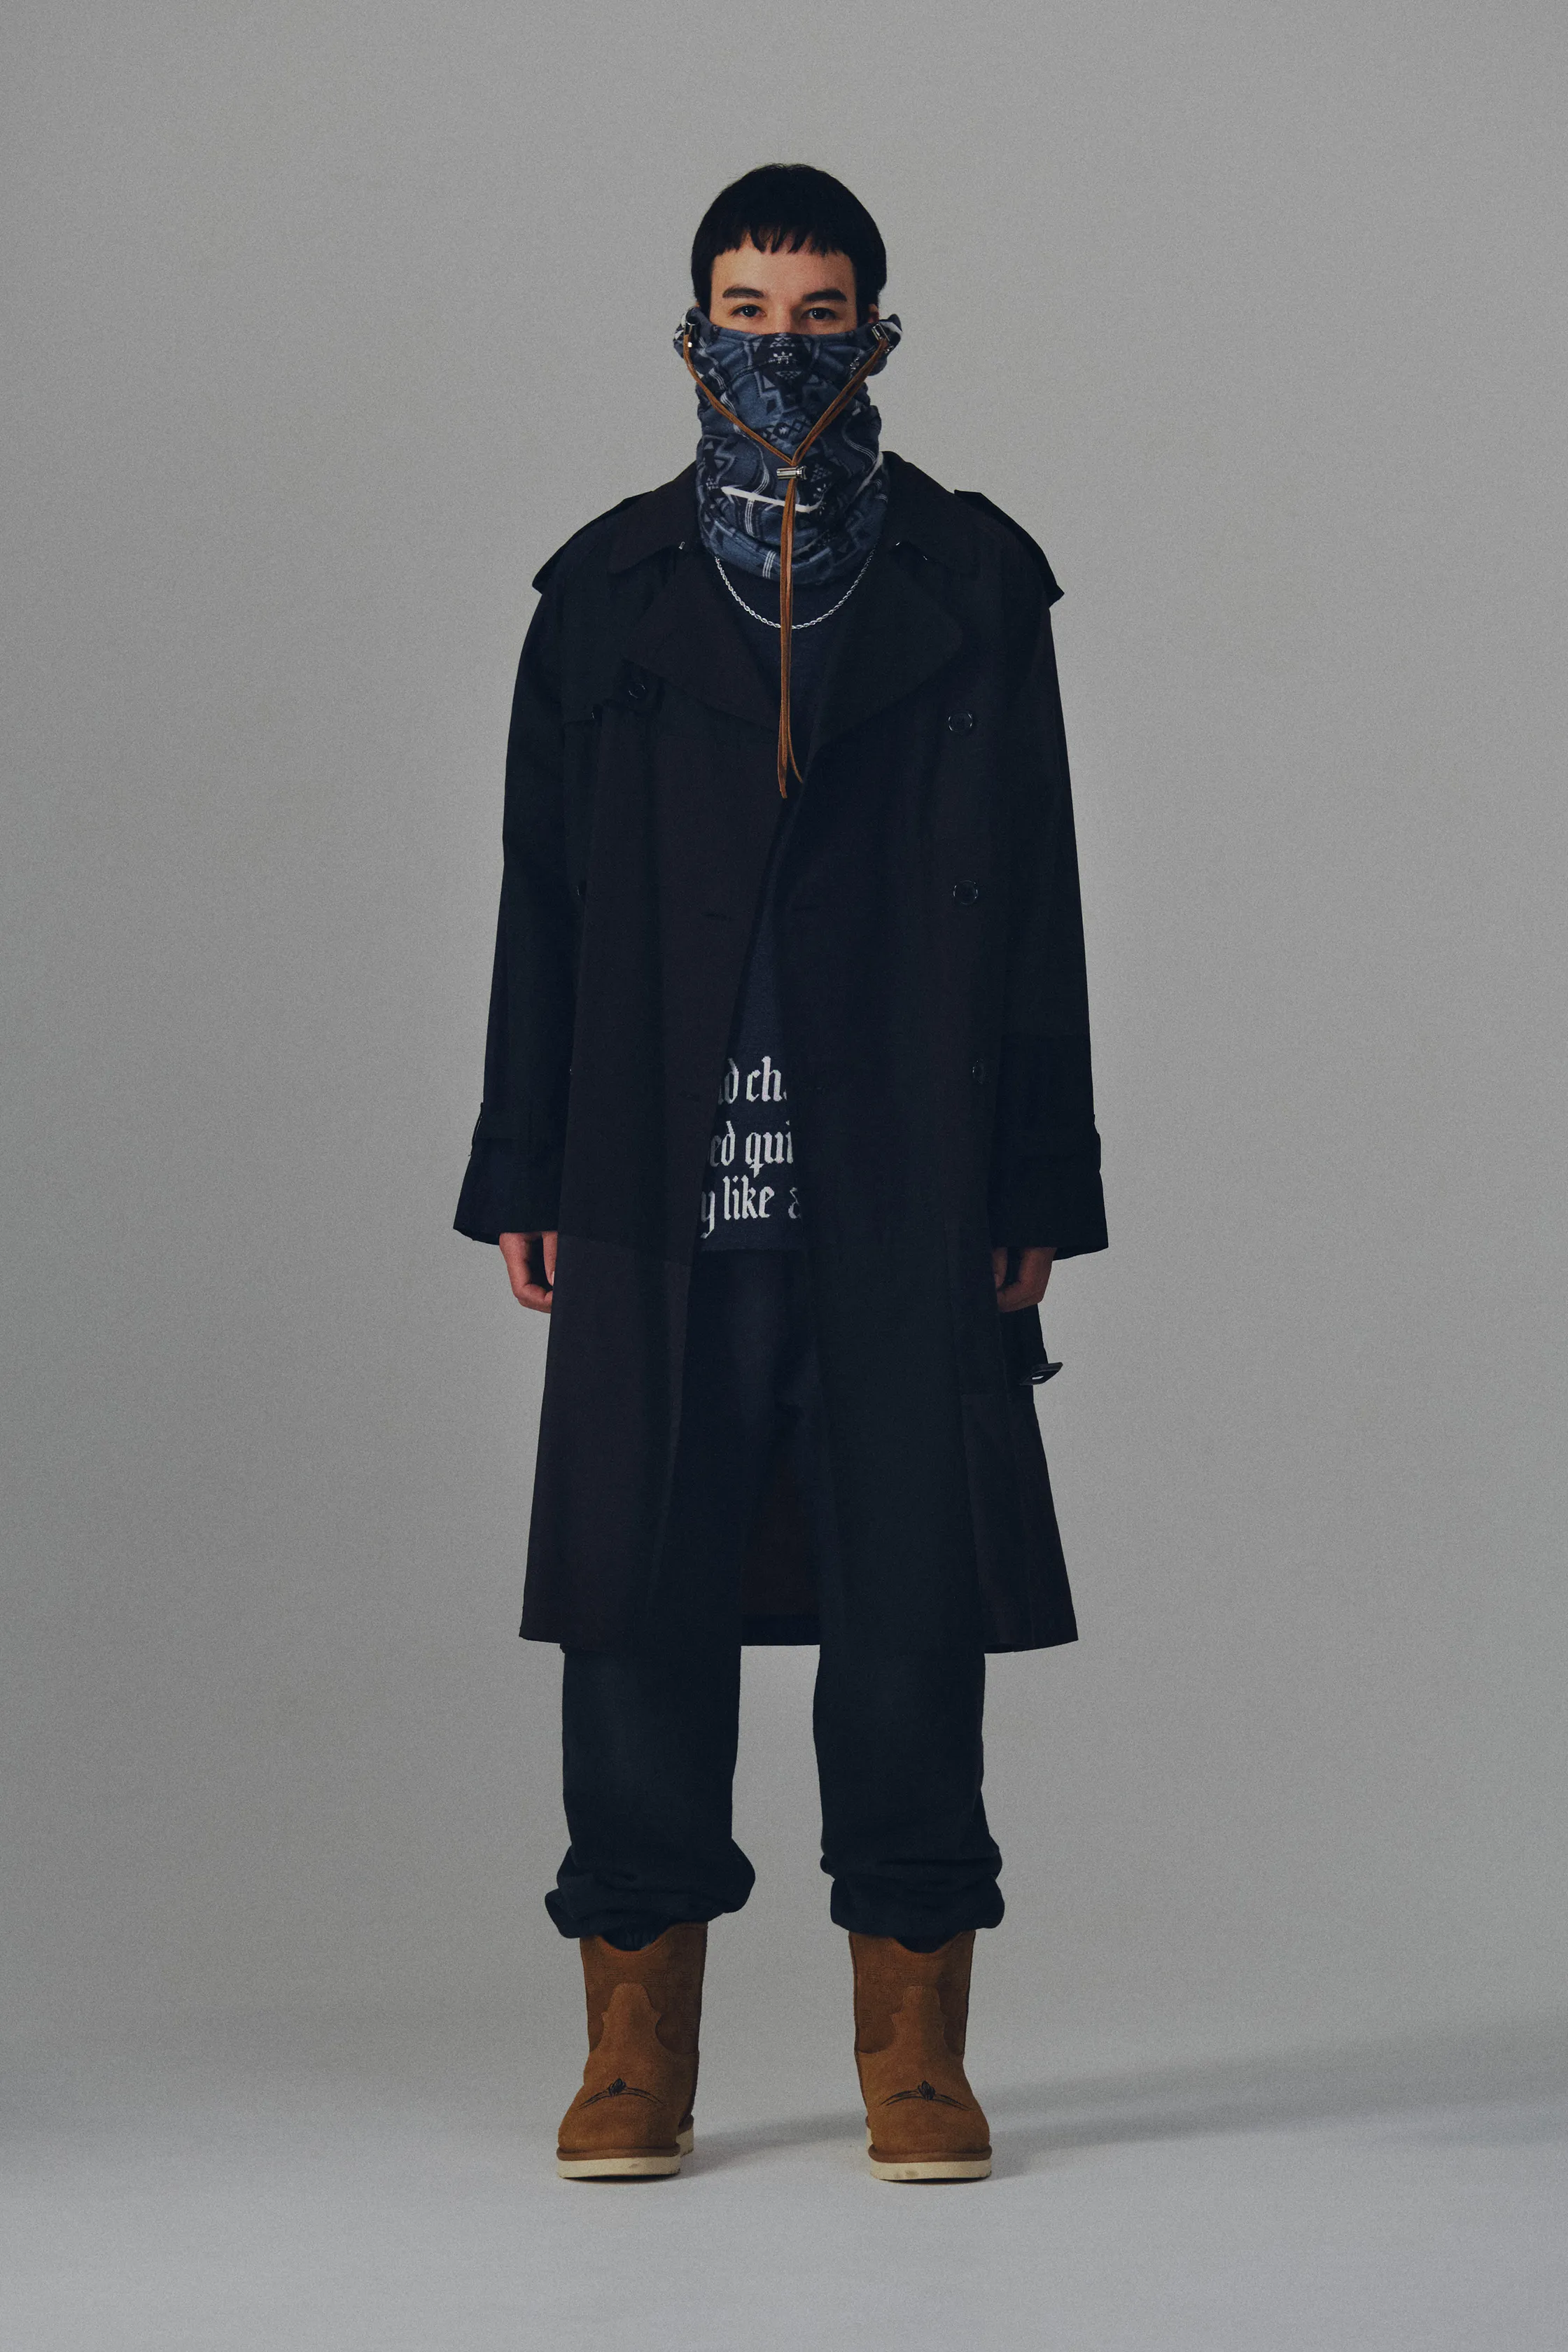 00044-Children-of-the-Discordance-Mens-Fall-22-credit-brand.png